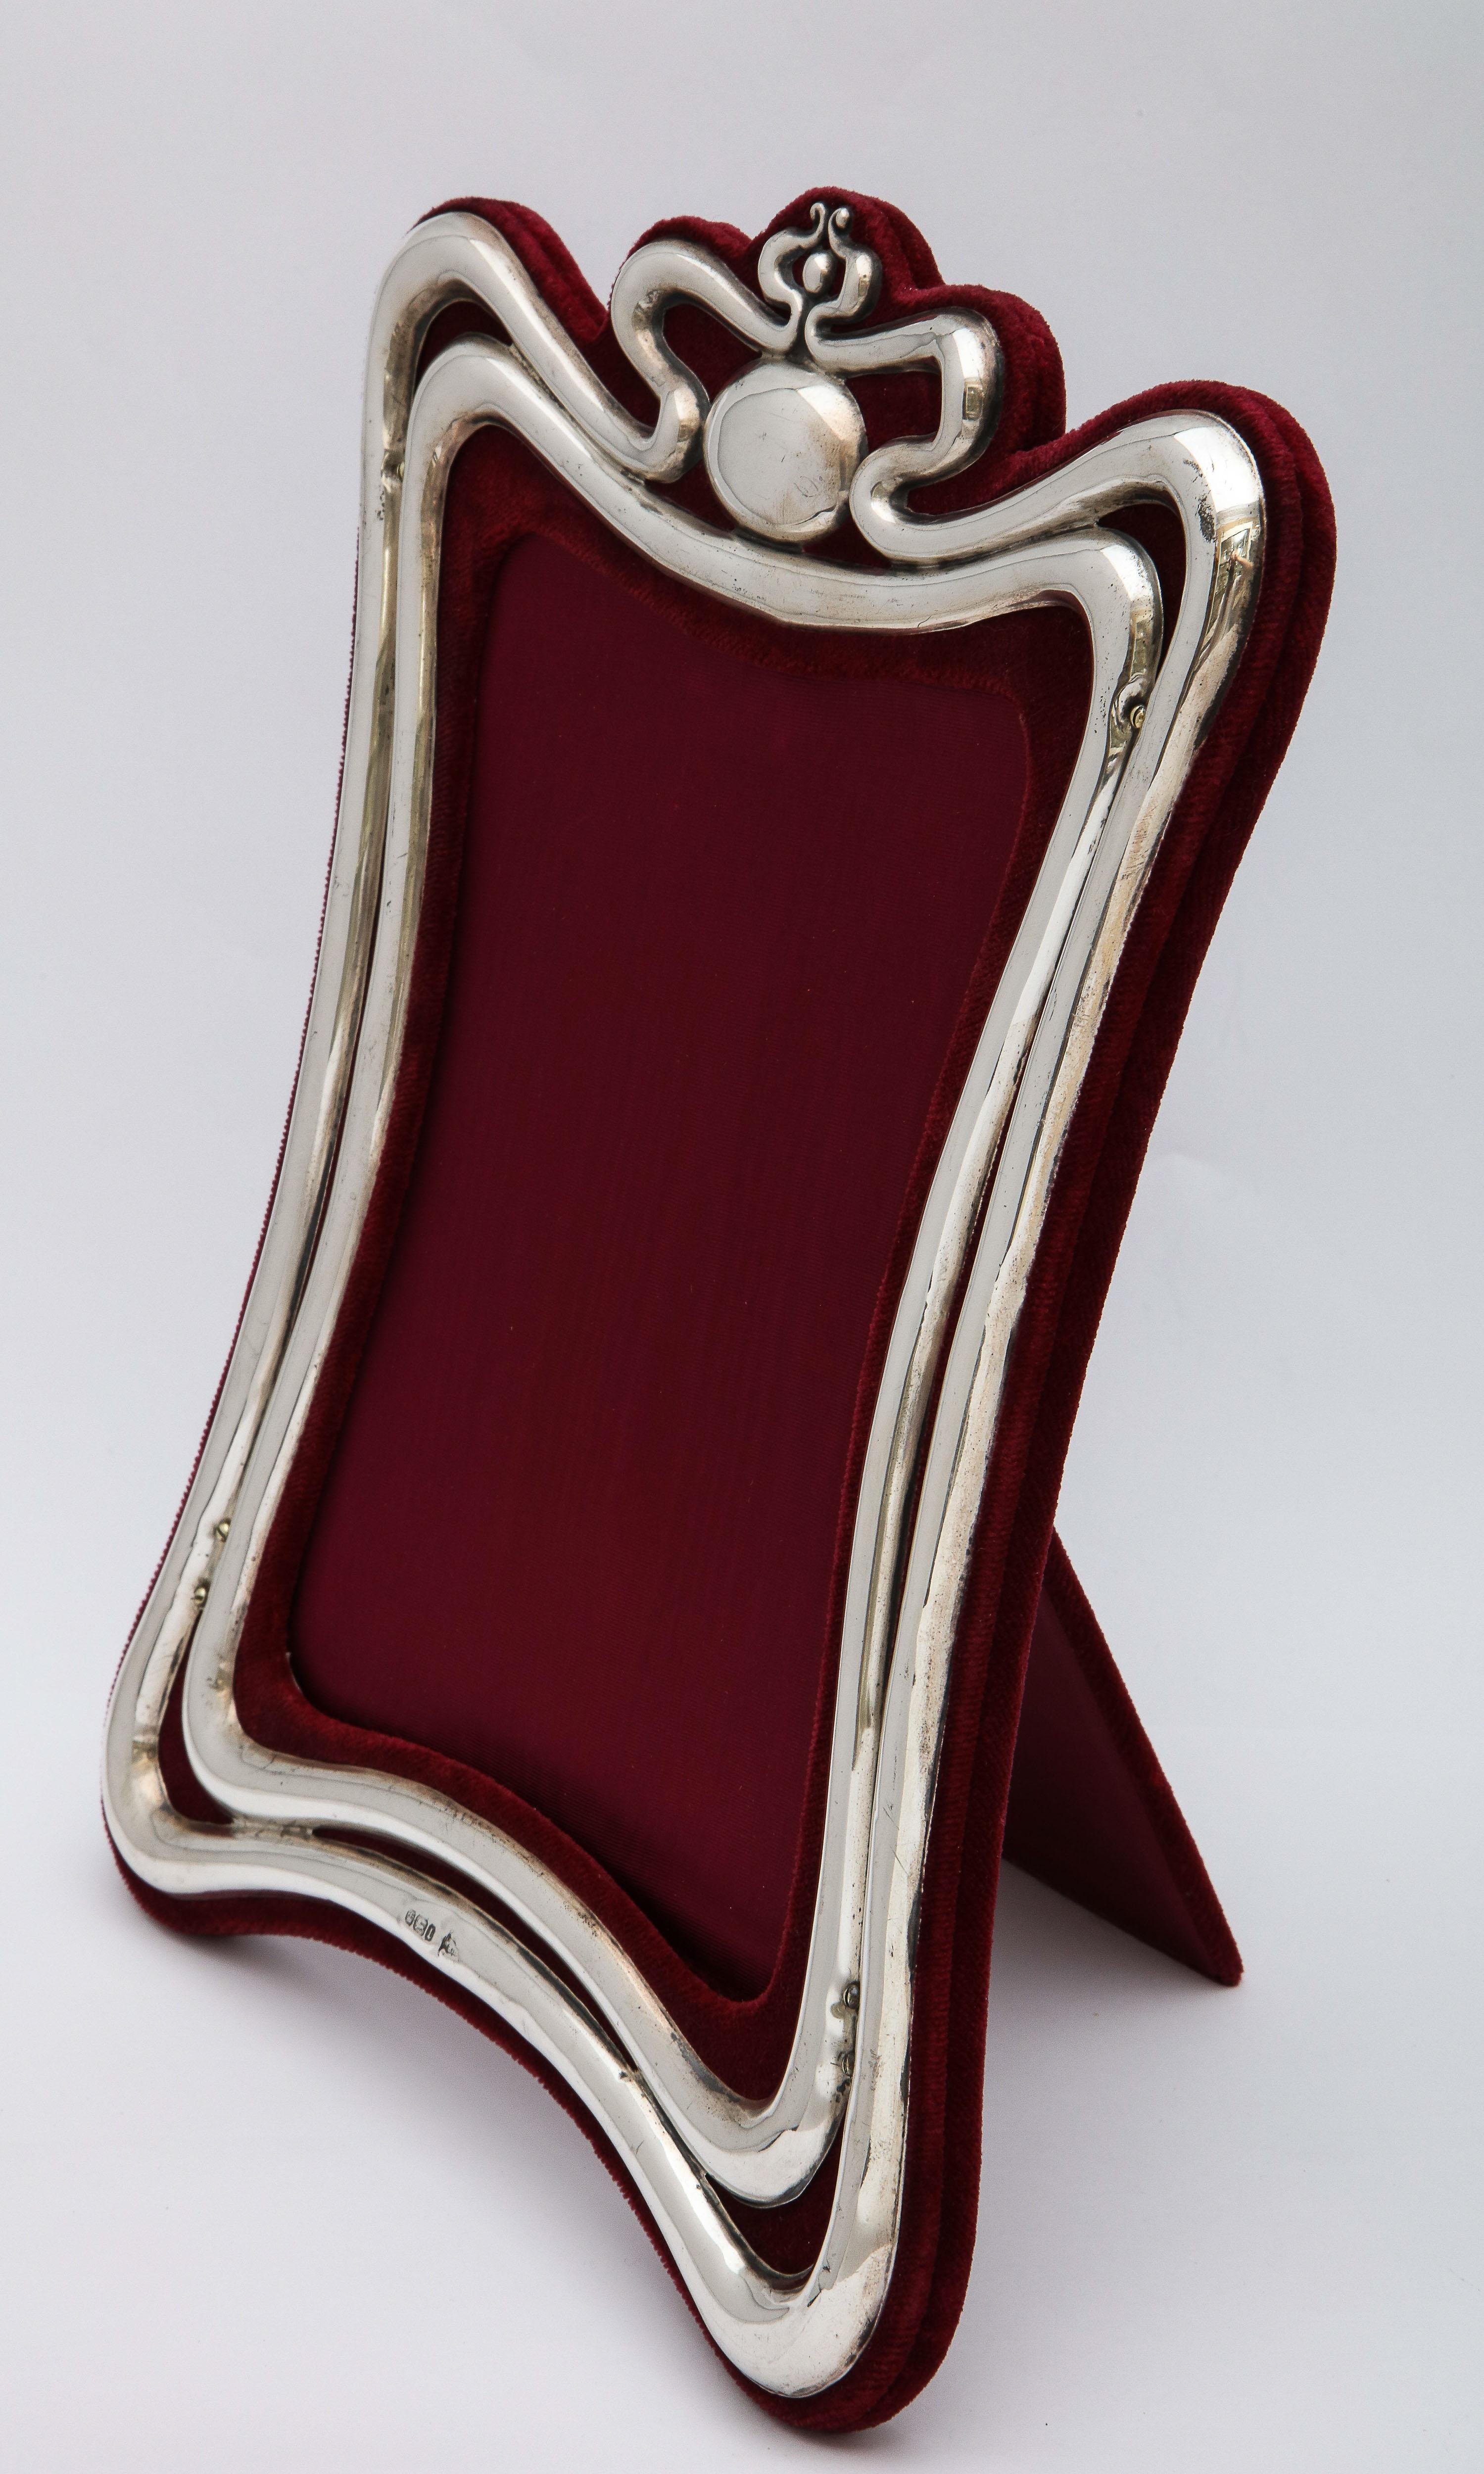 Large, Art Nouveau, sterling silver picture frame, Sheffield, England, 1903, Walker and Hall, makers. The sterling silver is mounted on deep burgundy velvet. The frame stands 11 1/2 inches high (at highest point) x 8 1/2 inches wide (at widest